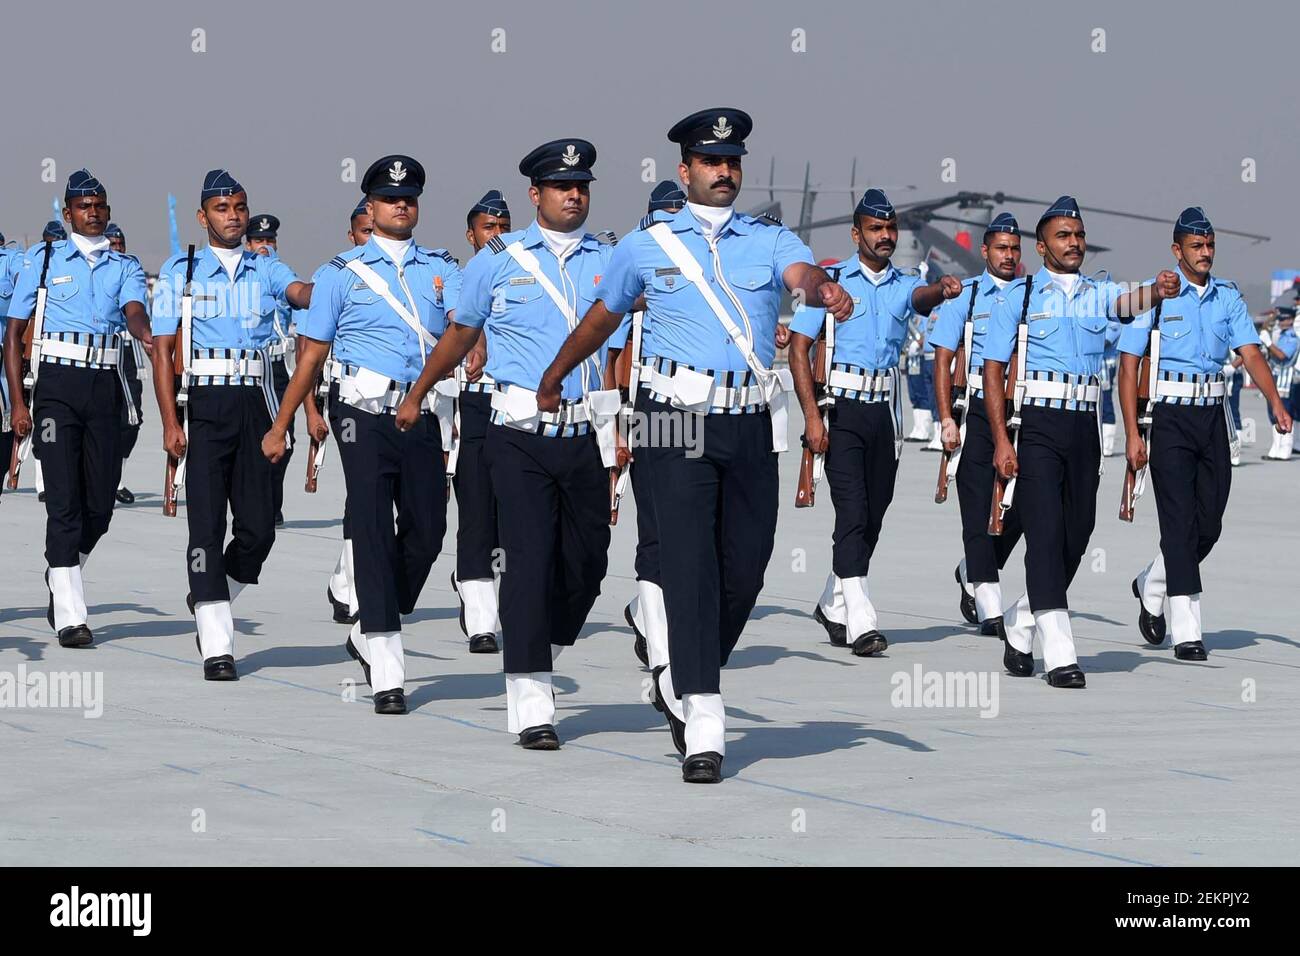 Indian Air Force To Unveil New Combat Uniform For Personnel On Air Force Day